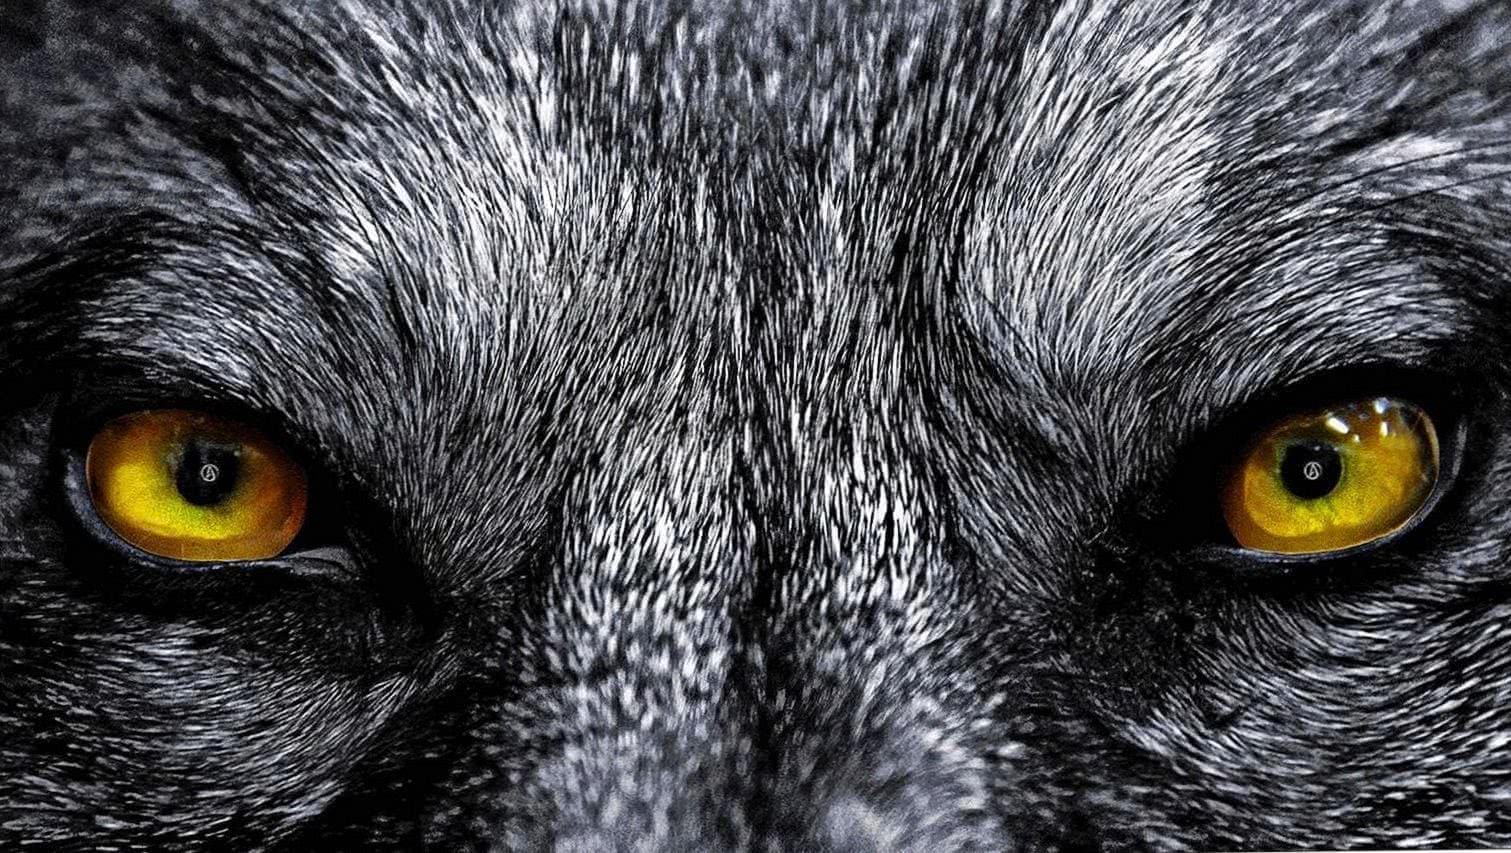 Wolf Eyes HD Wallpapers